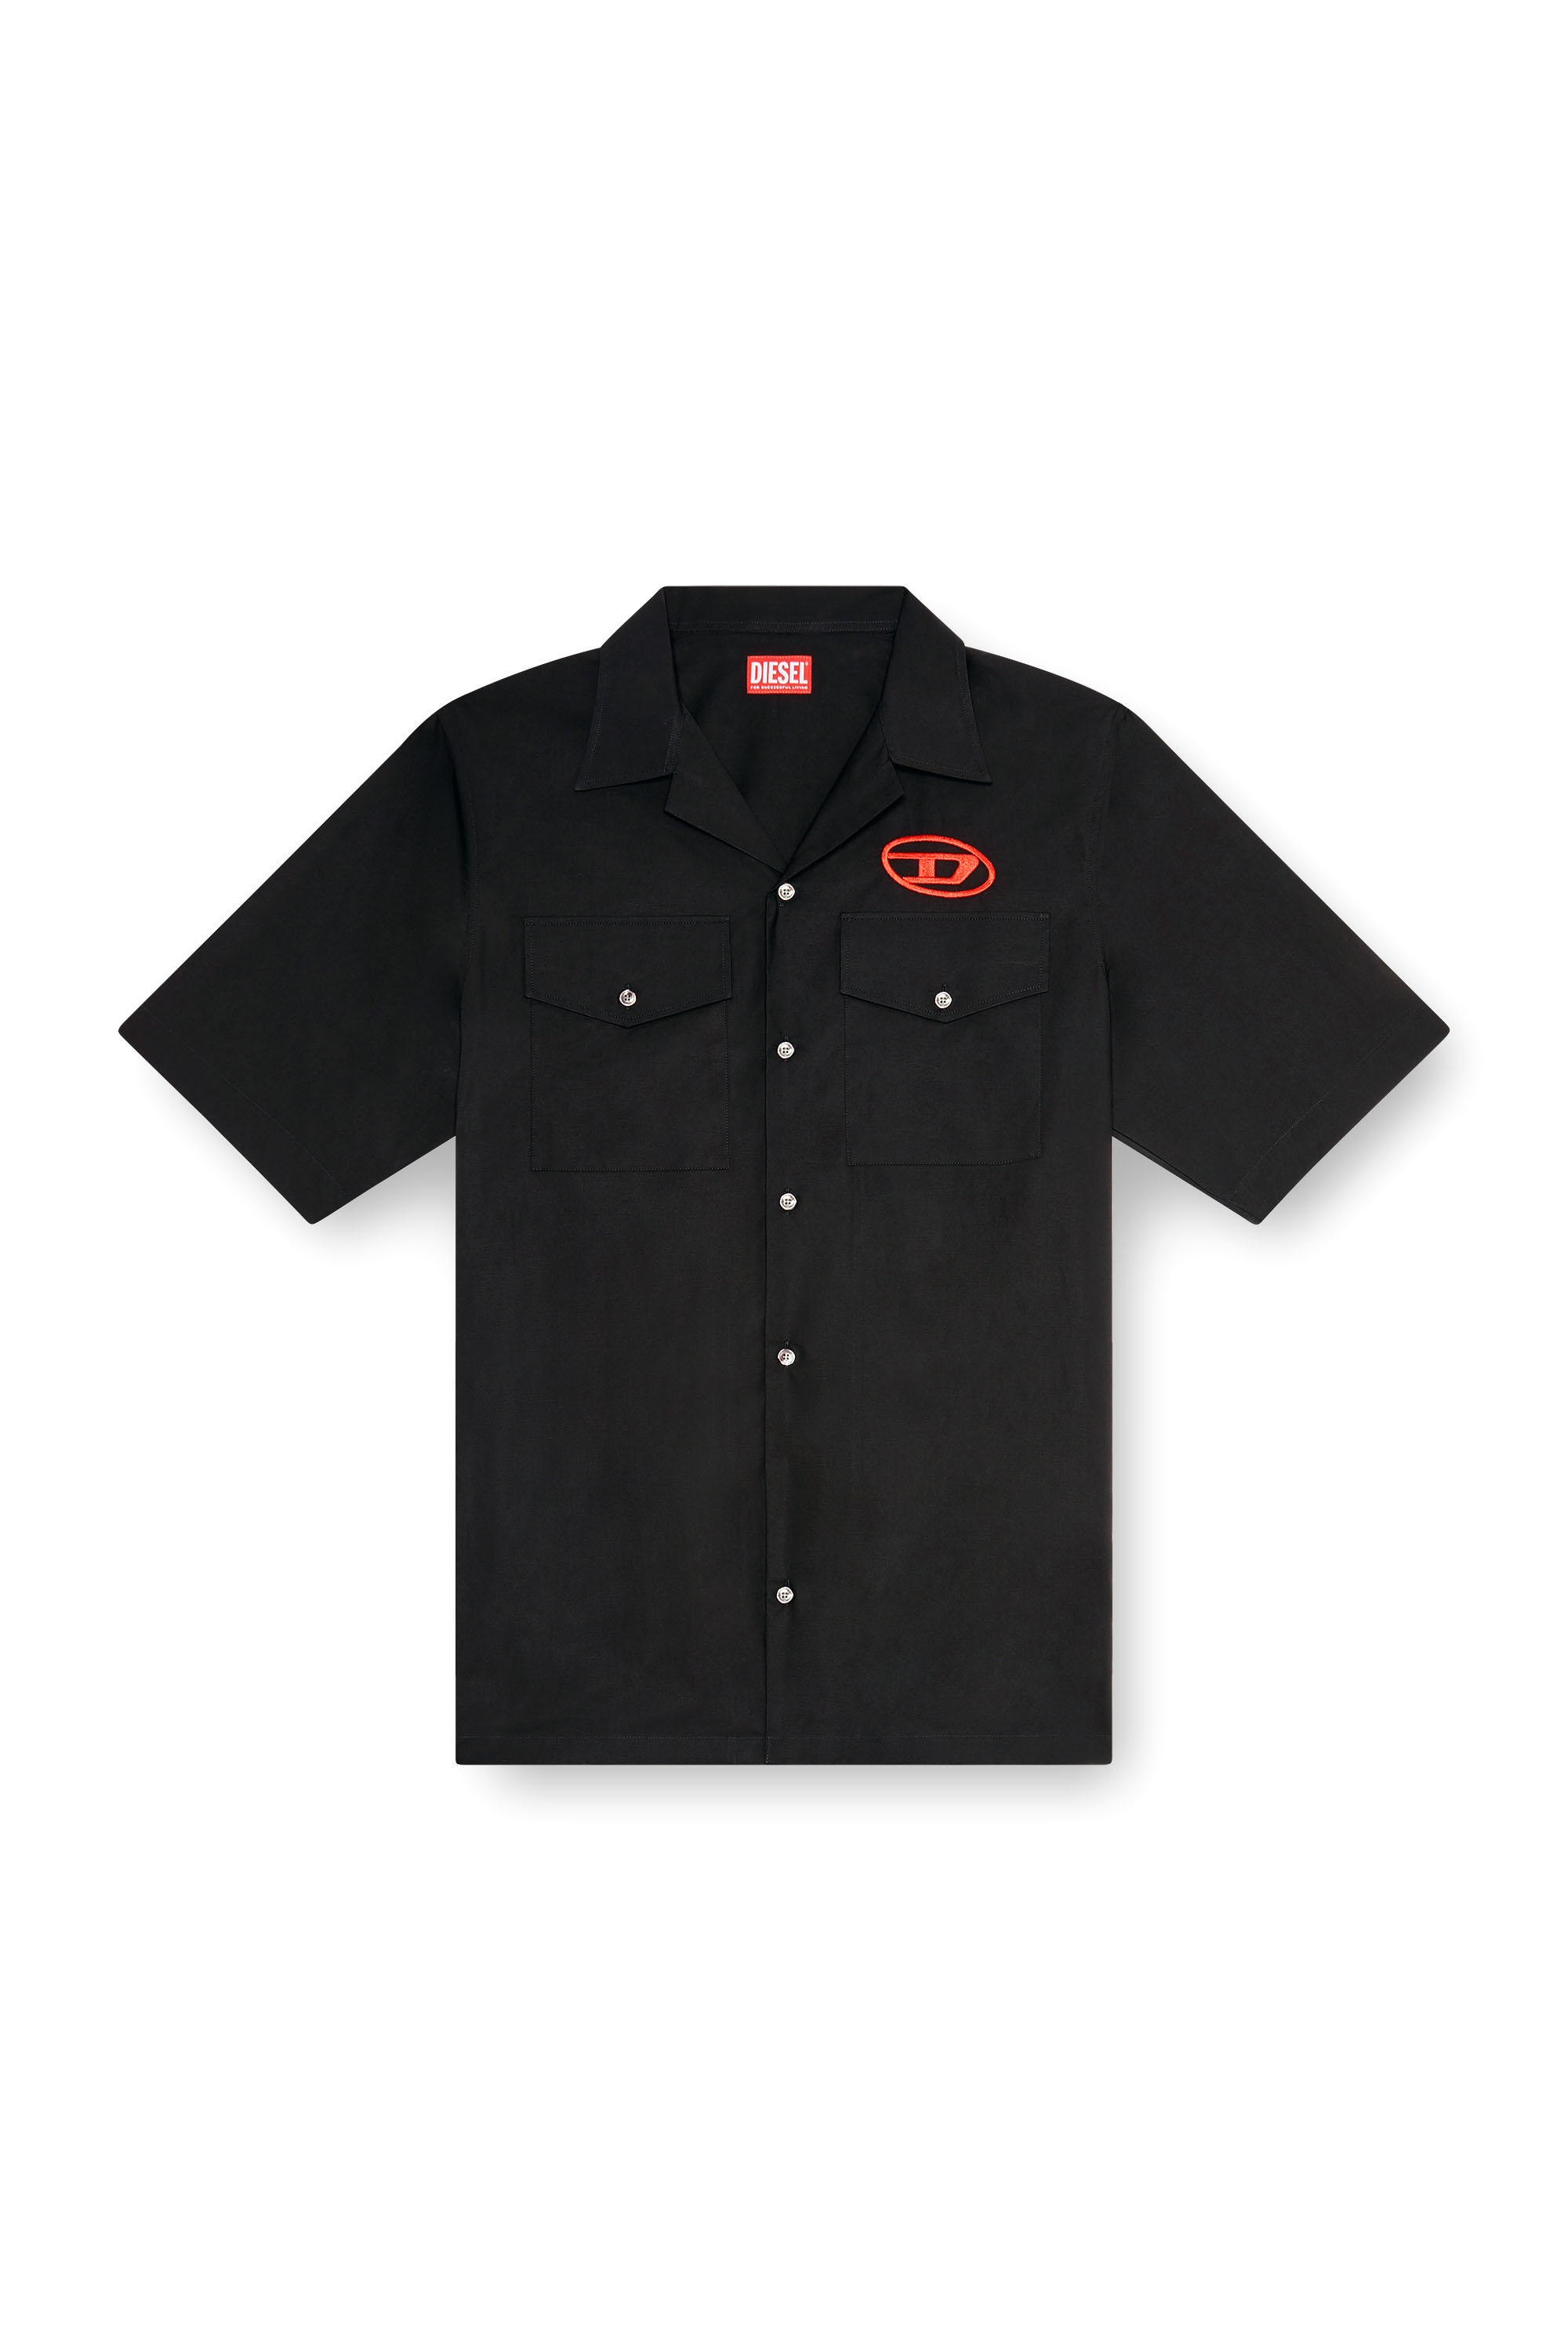 Diesel - S-MAC-22-B, Man Bowling shirt with embroidered logo in Black - Image 5